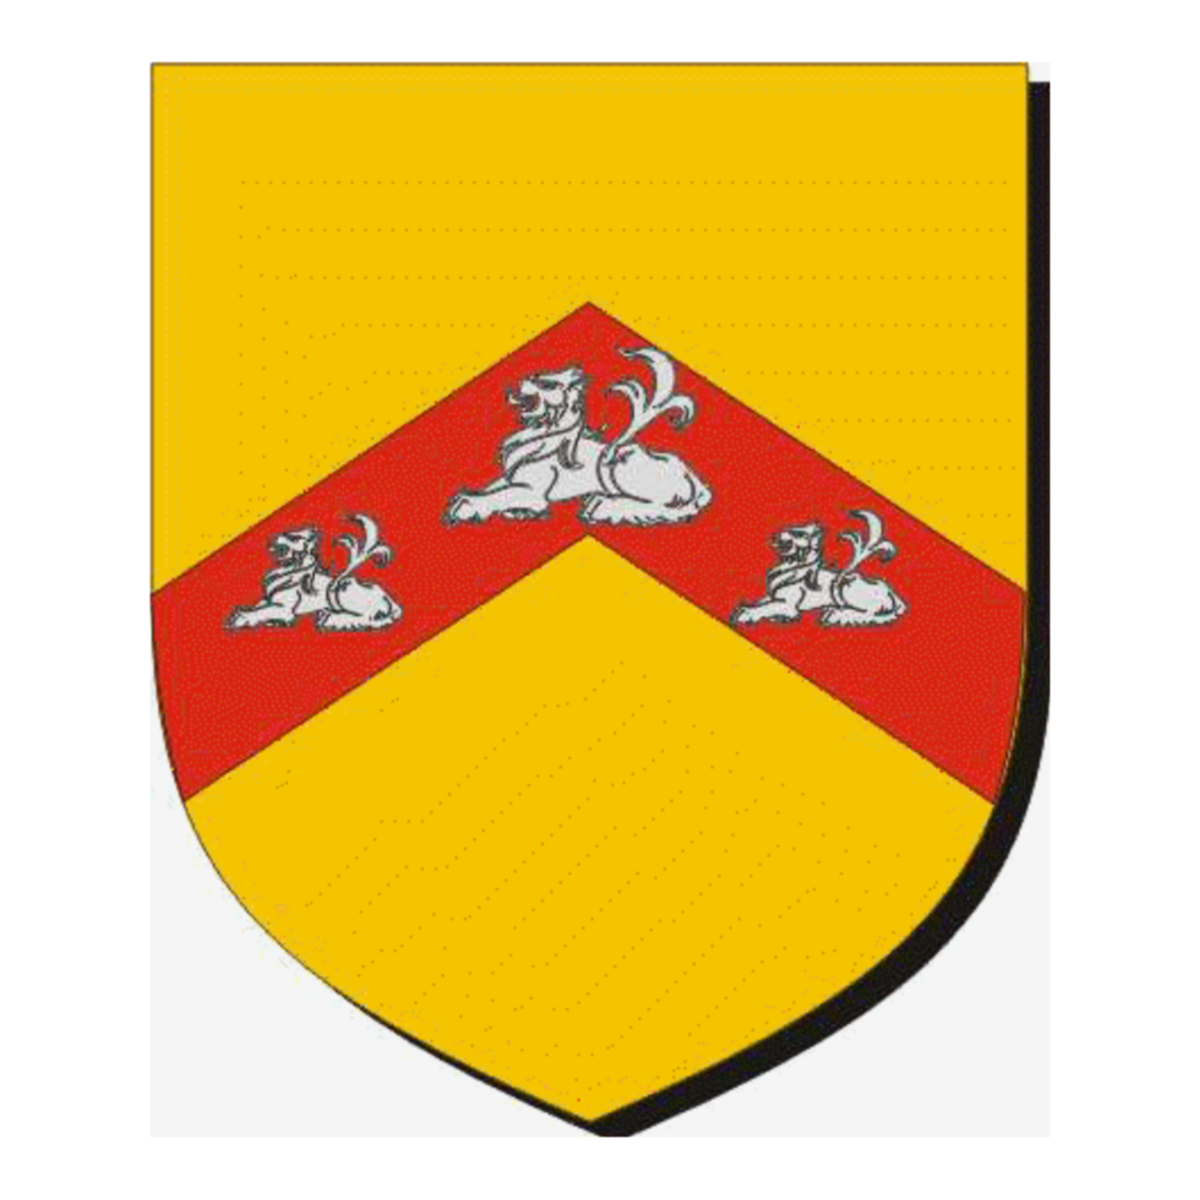 Coat of arms of familyBolton